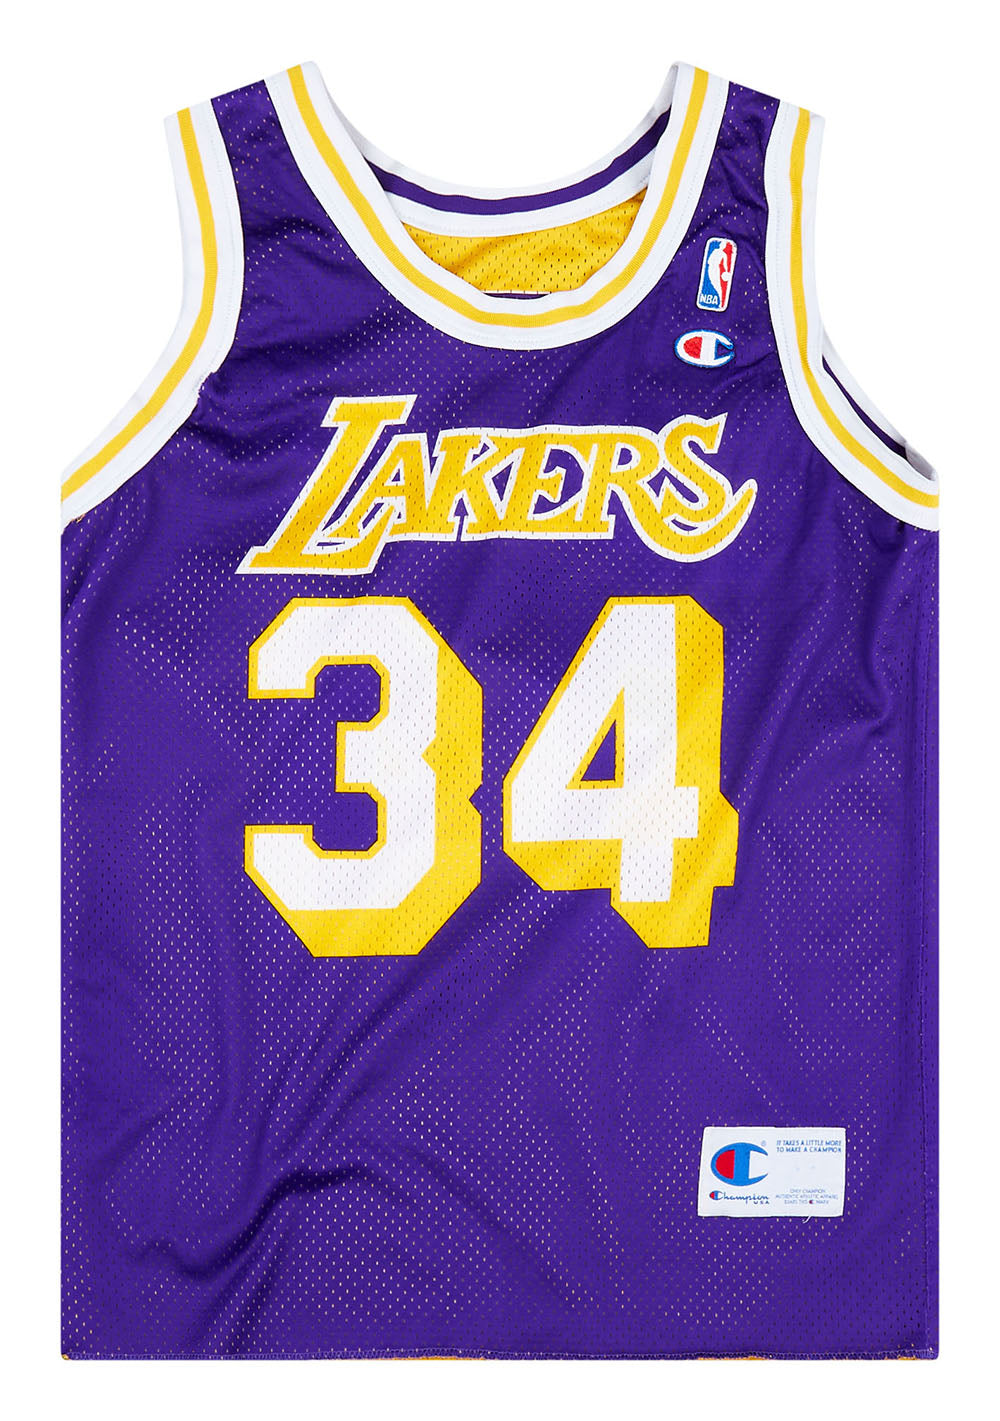 1996-99 LA LAKERS O'NEAL #34 CHAMPION JERSEY (HOME) S - Classic American  Sports